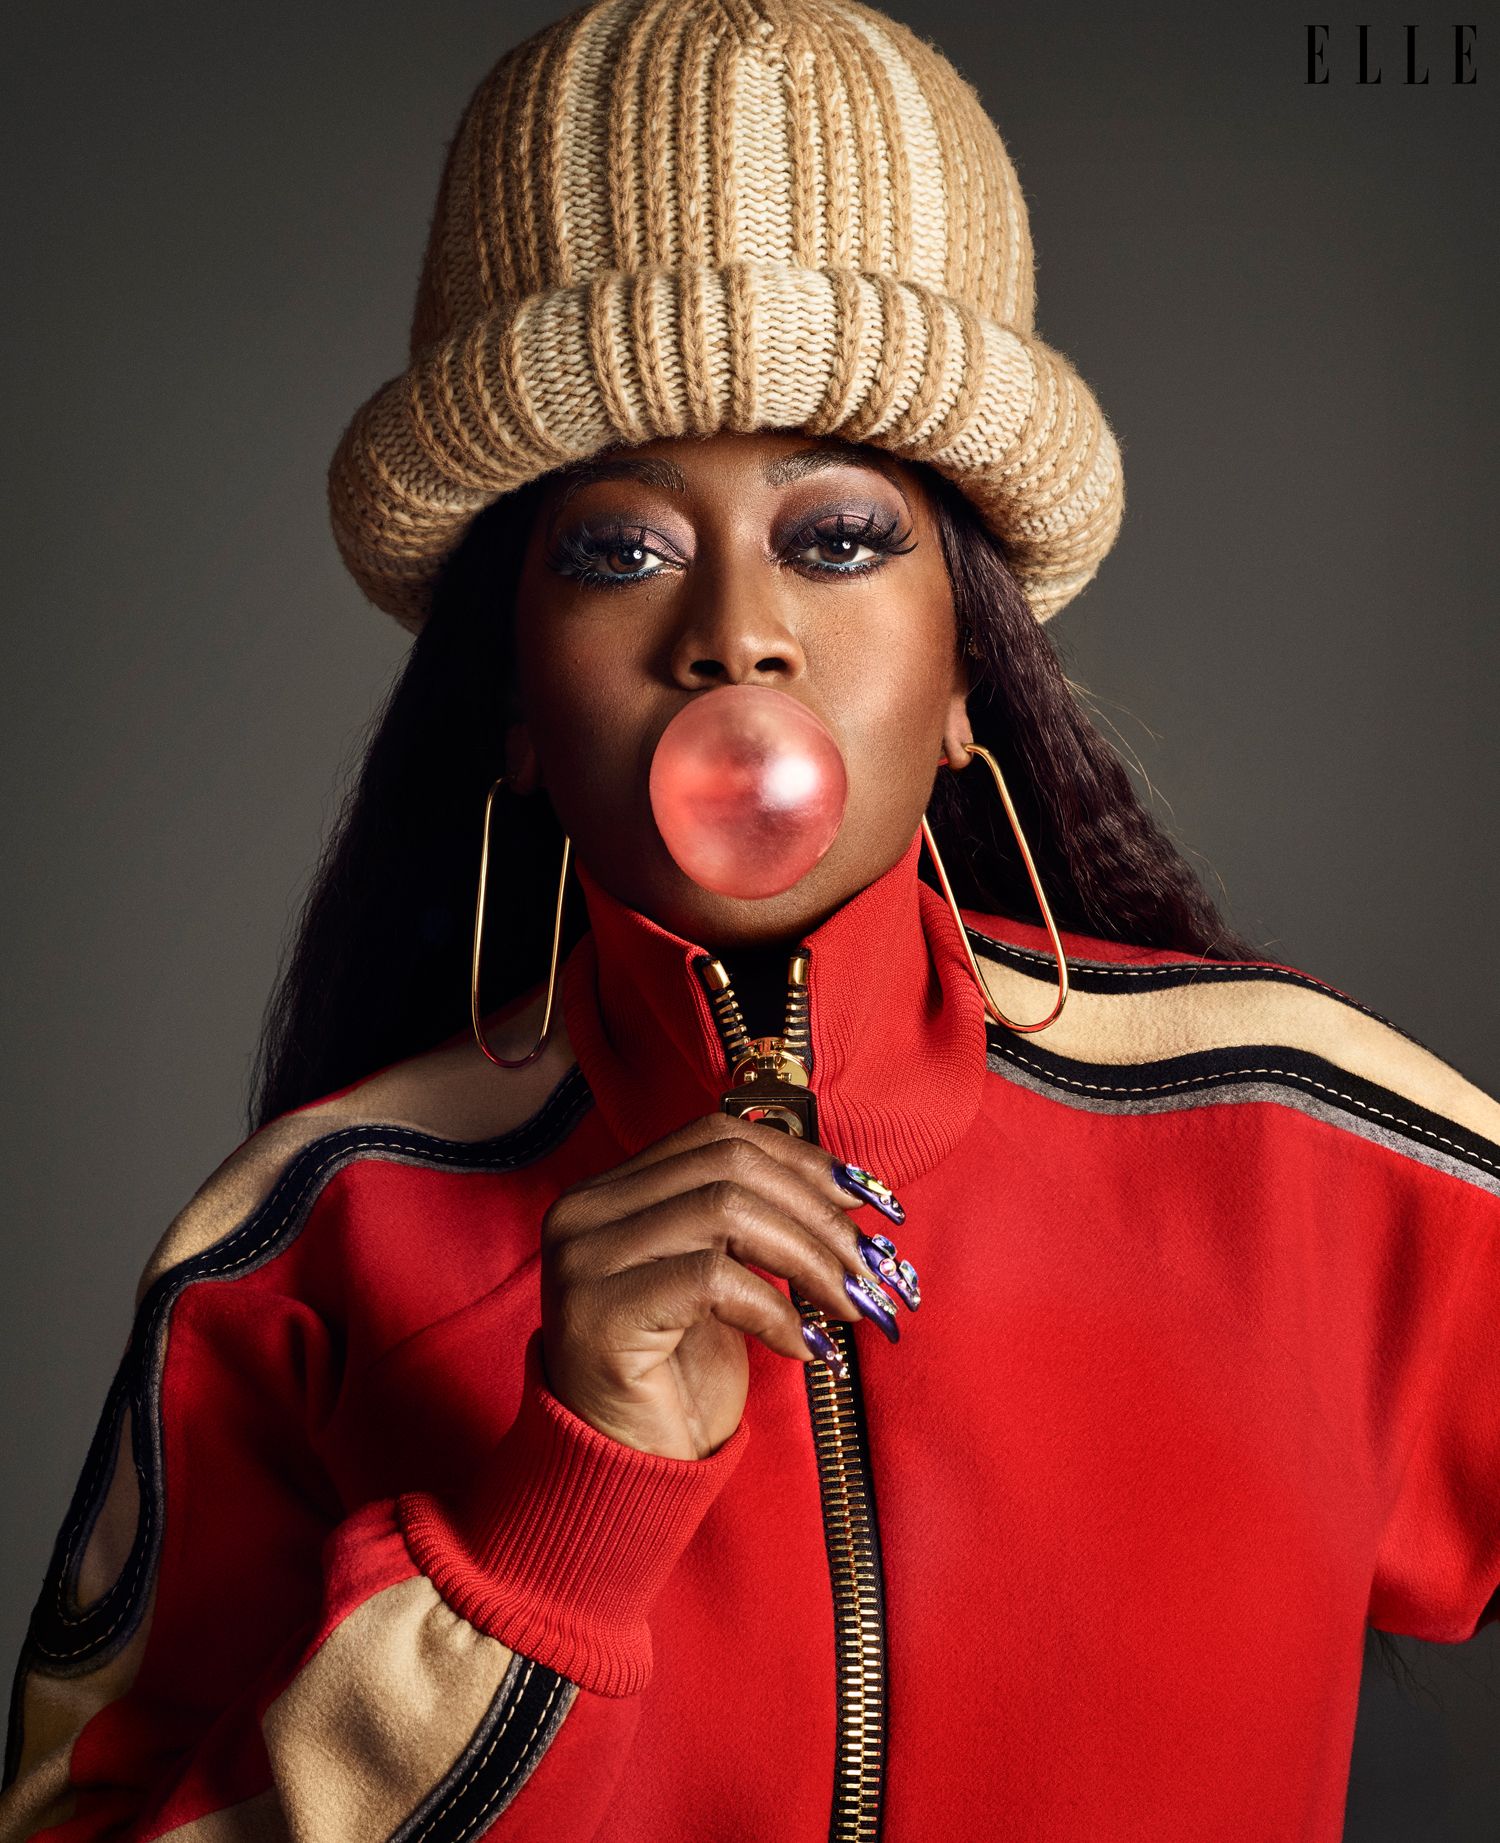 How Missy Elliott Became an Icon - Miss Elliot Interview and